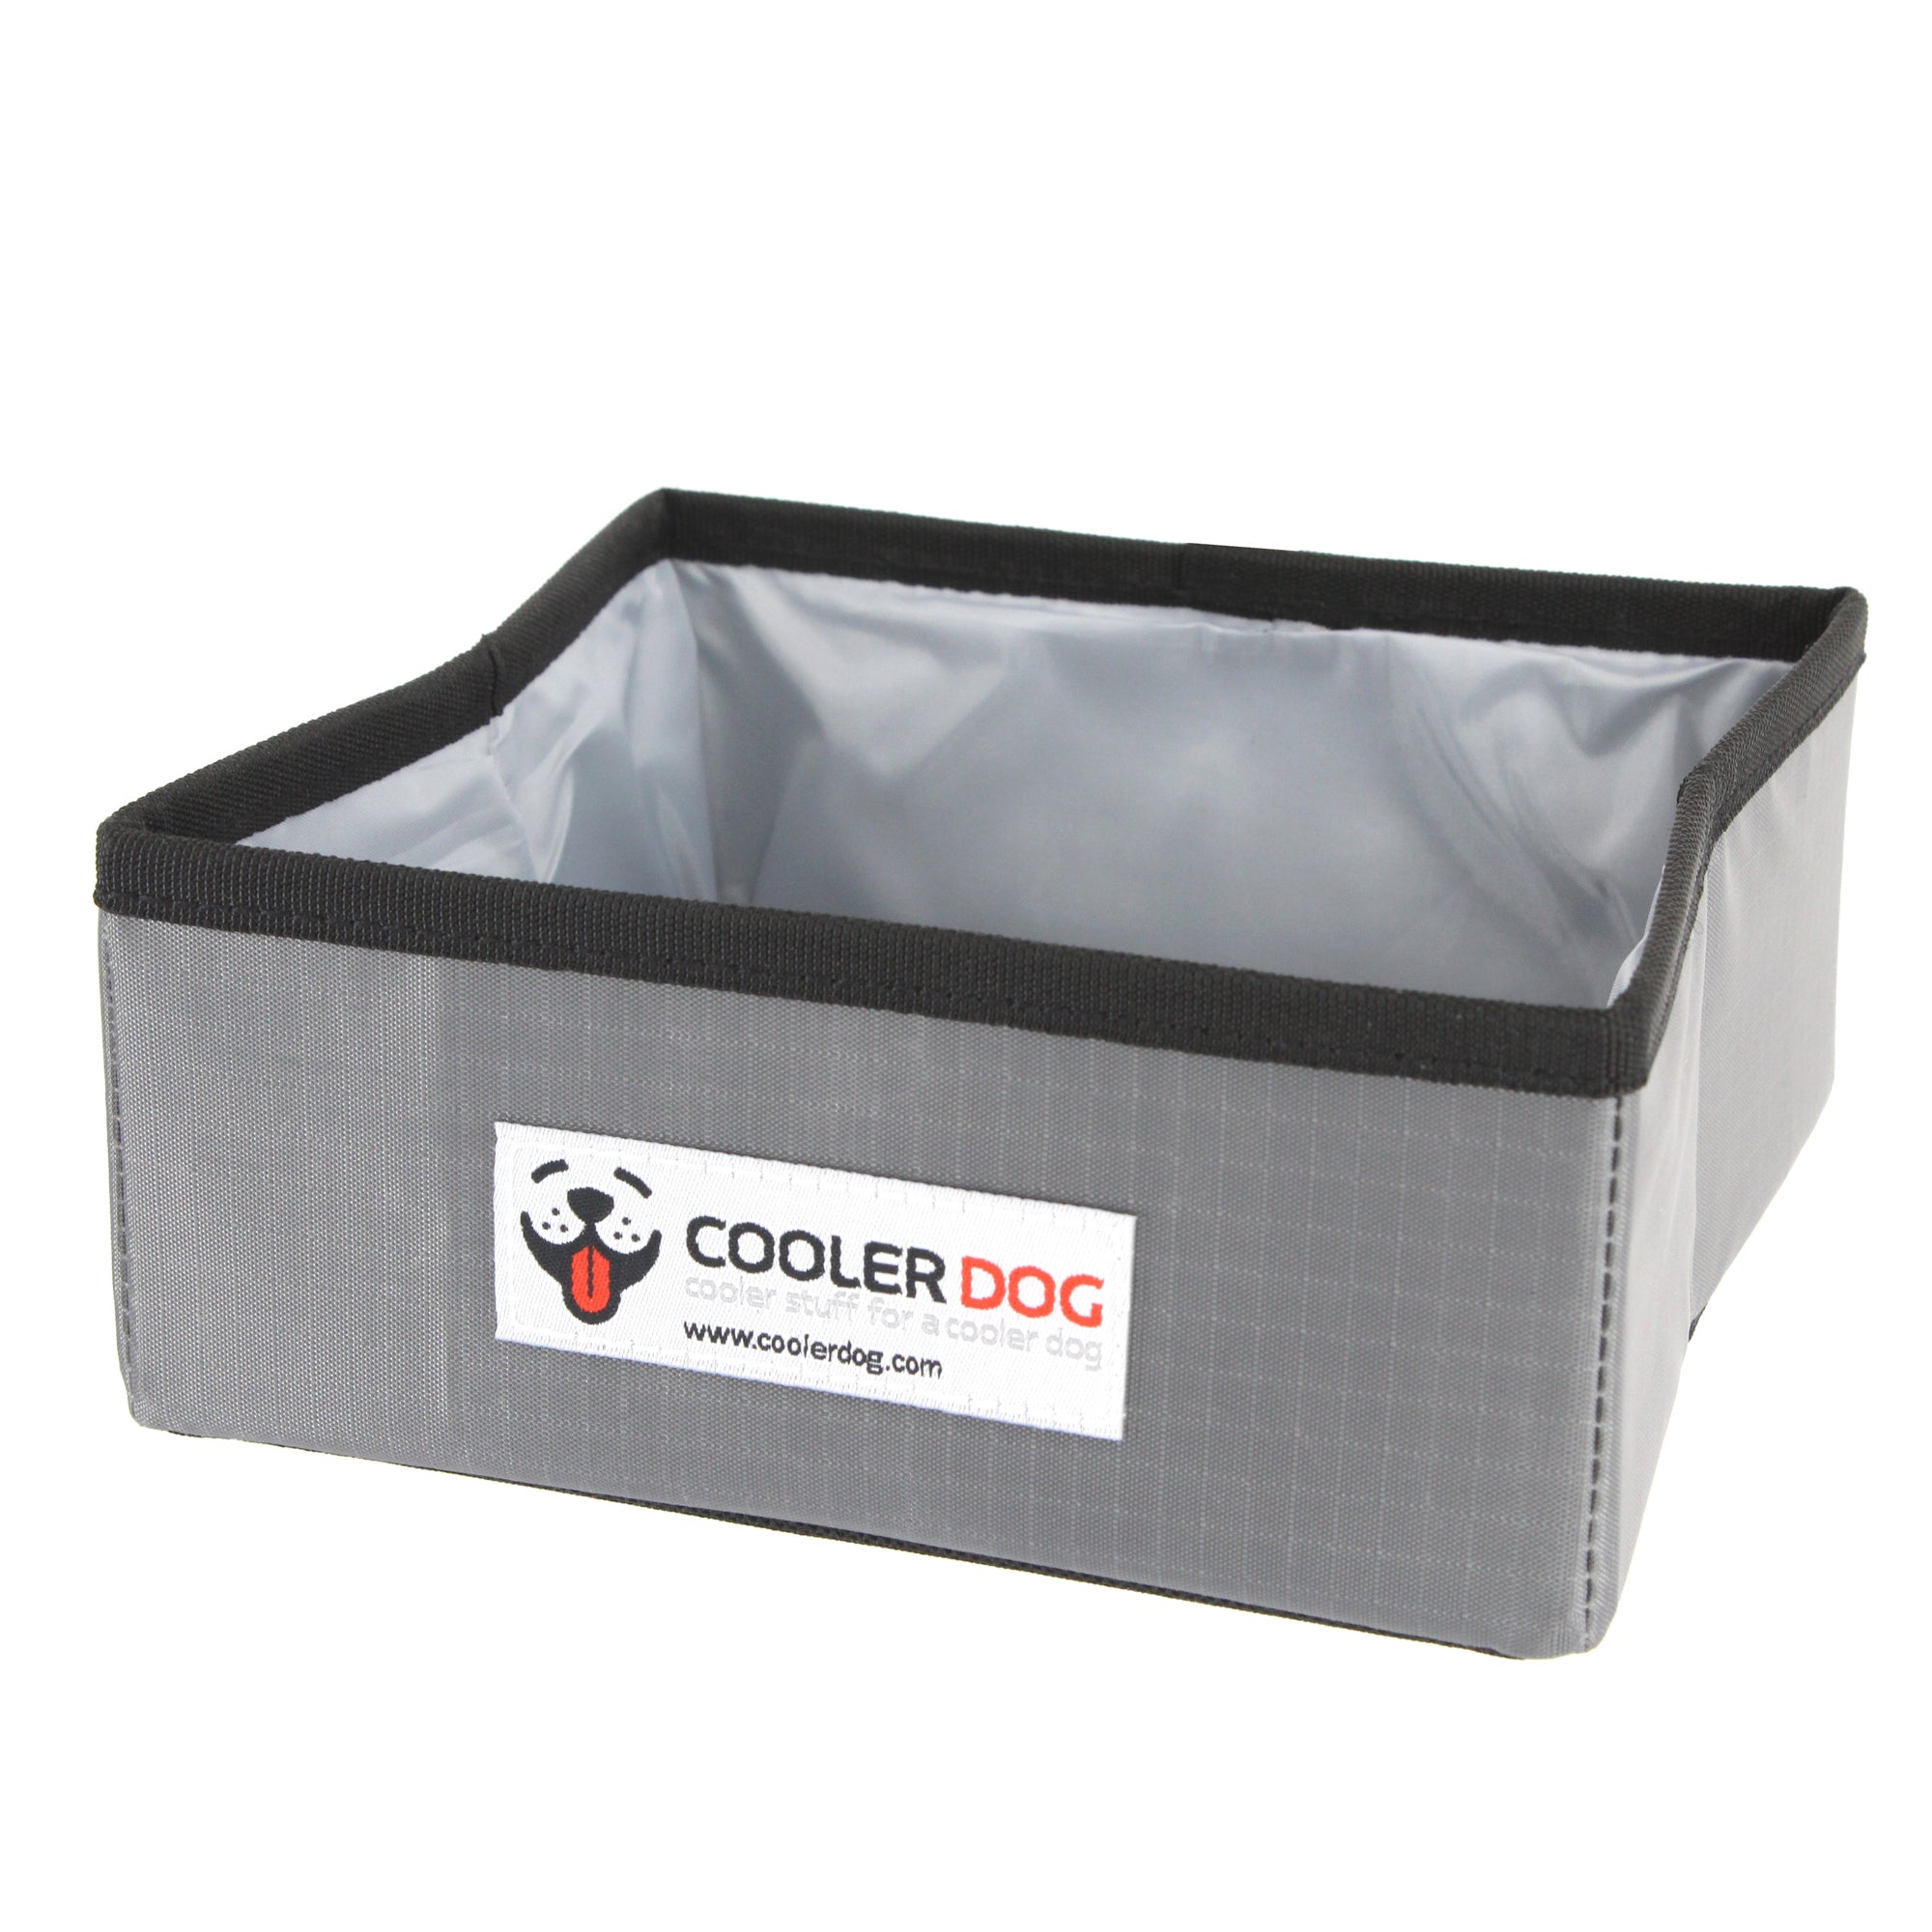 Unfolded CoolerDog large, gray bowl without water